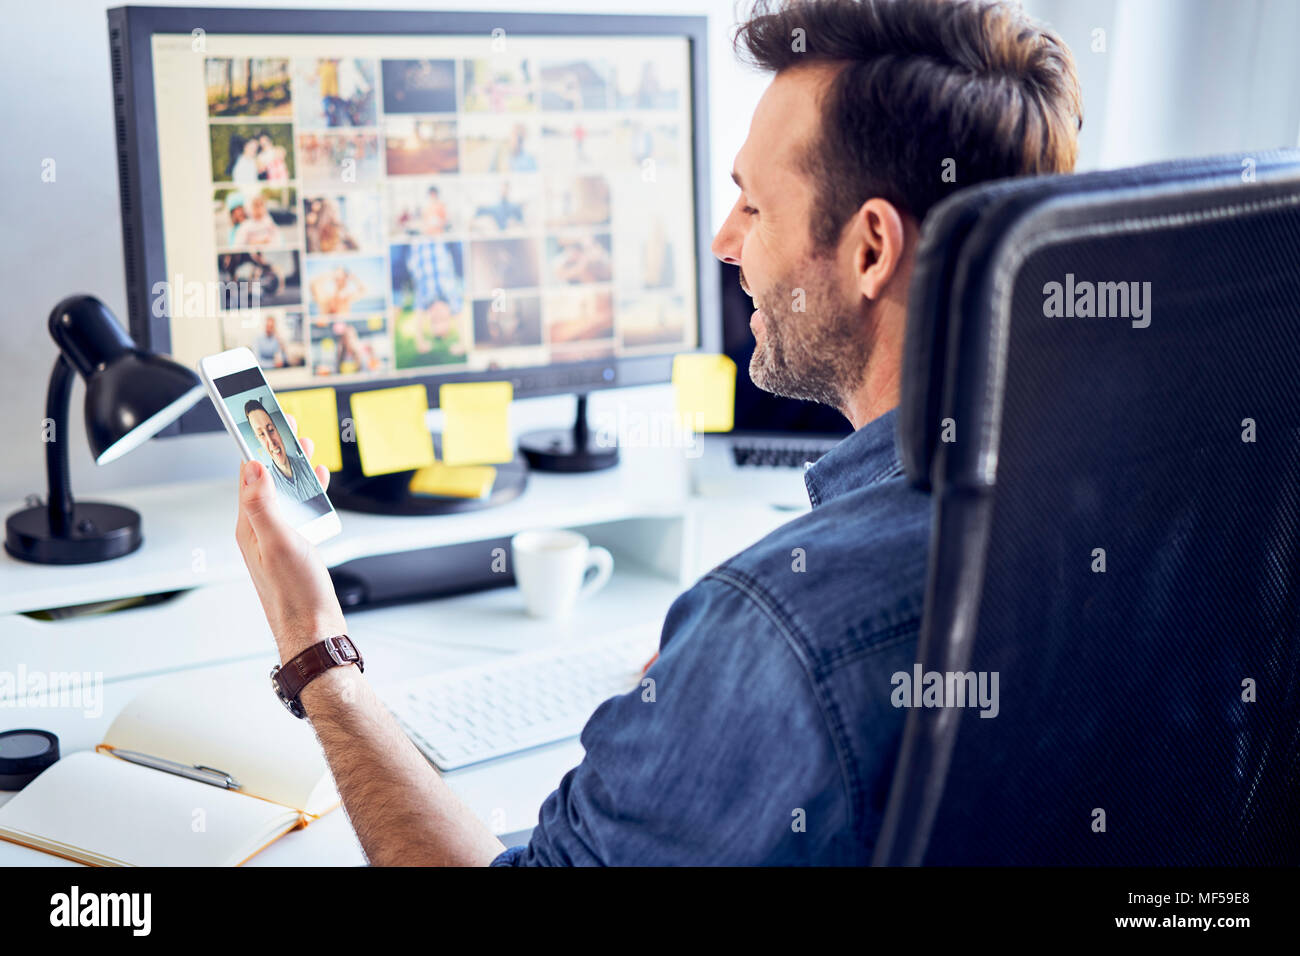 Photo editor at desk in office having video chat on his phone Stock Photo